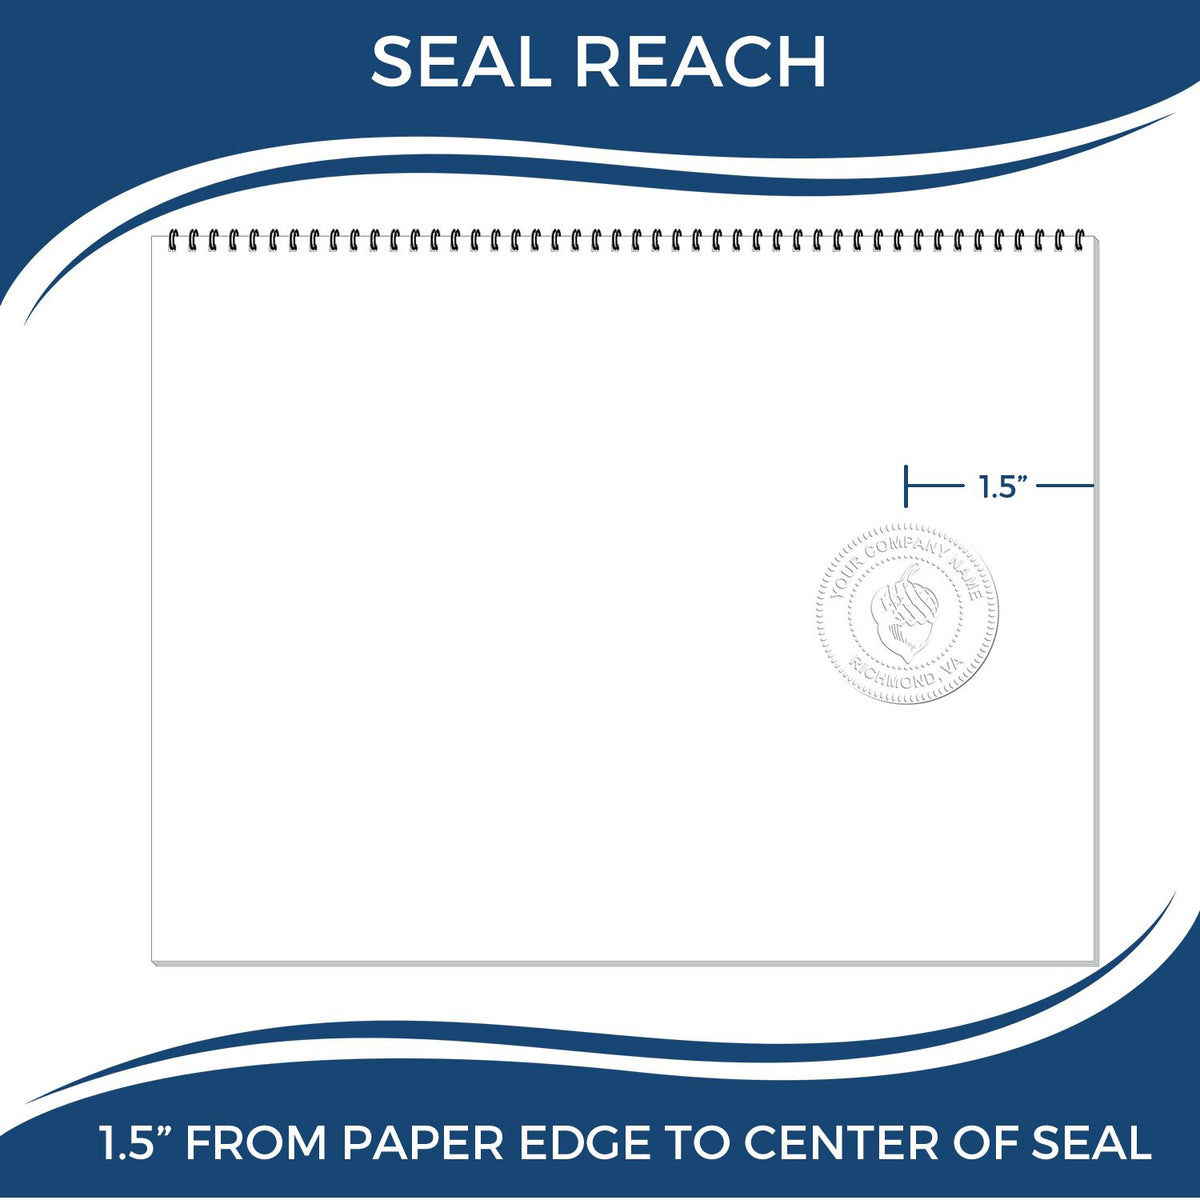 An infographic showing the seal reach which is represented by a ruler and a miniature seal image of the Hybrid Georgia Engineer Seal